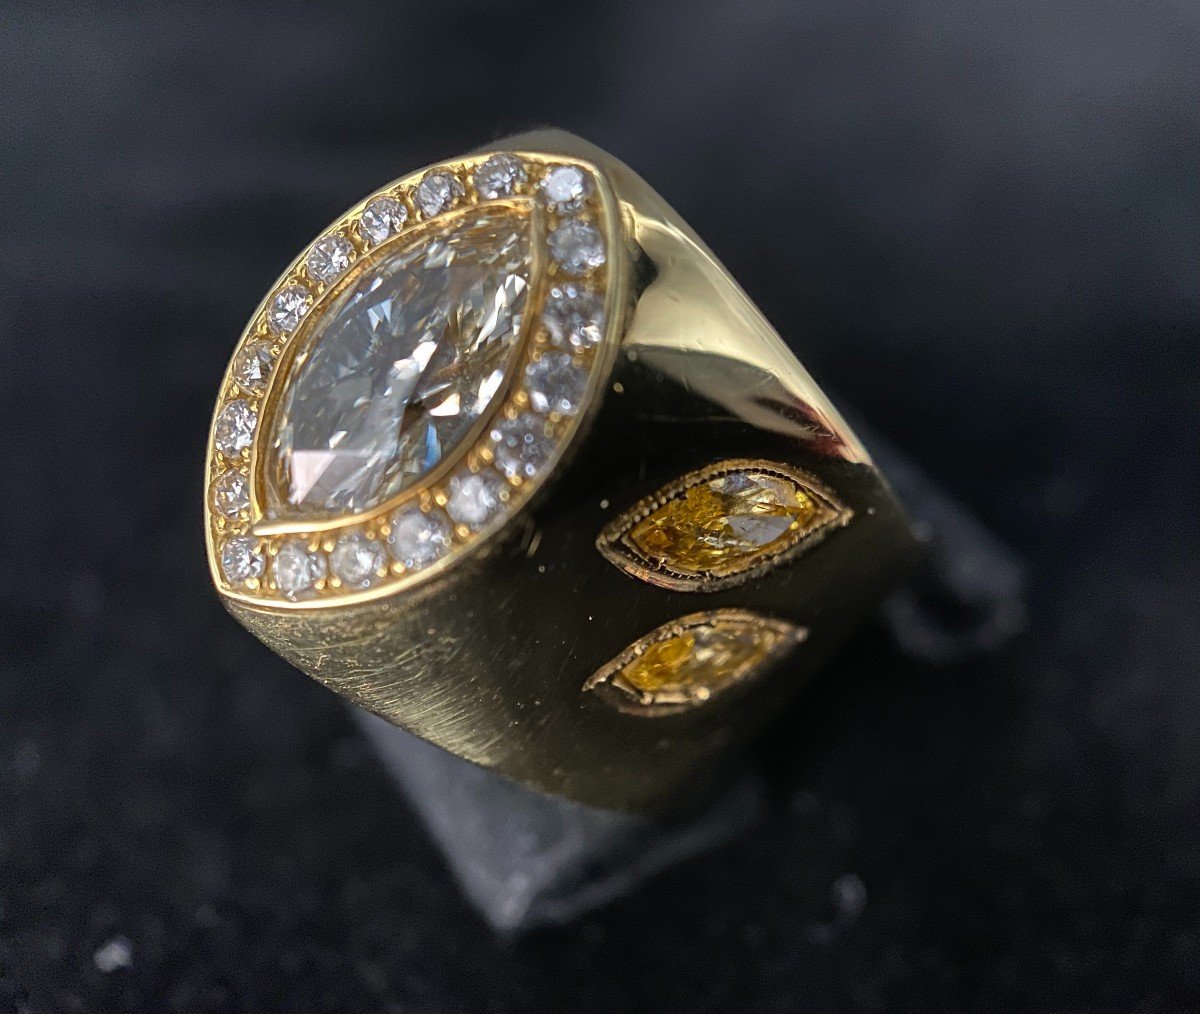 18k Yellow Gold Ring With Marquise Cut Diamond Of 1.50 Carats (si - G / H)-photo-2